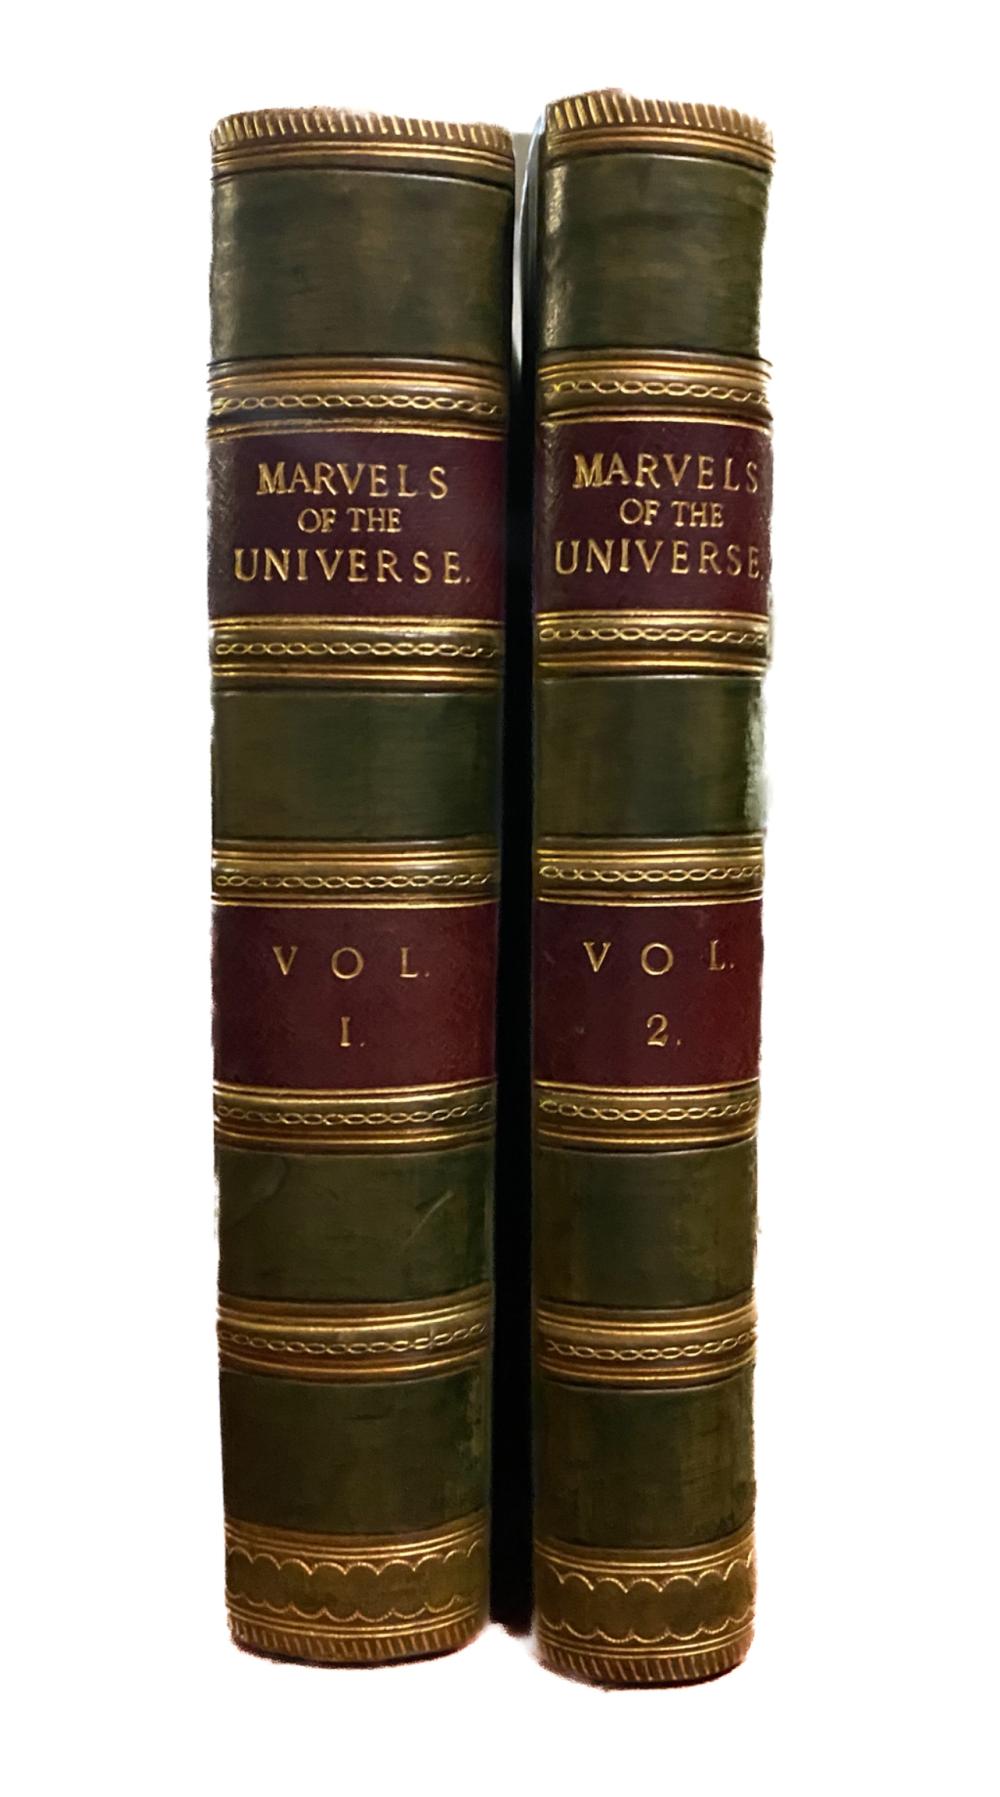 MARVELS OF THE UNIVERSE (VOL. 1